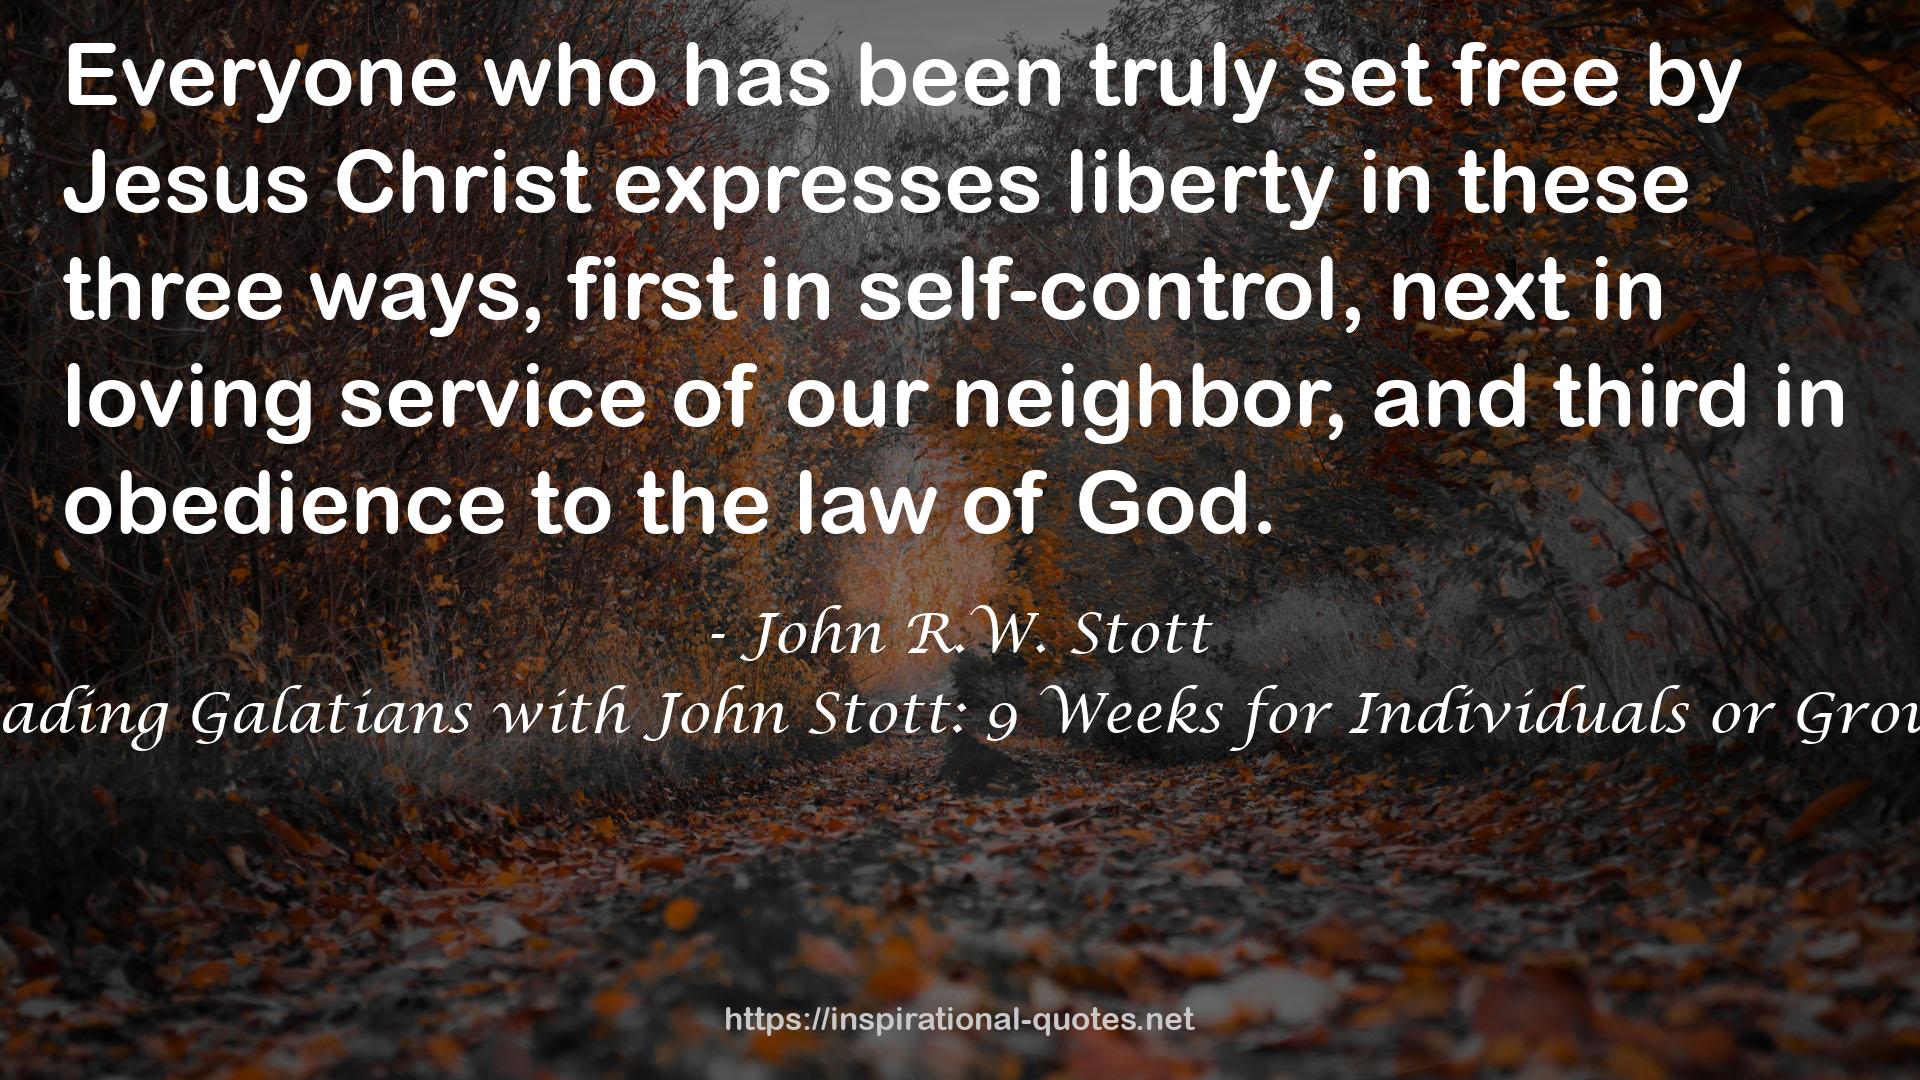 Reading Galatians with John Stott: 9 Weeks for Individuals or Groups QUOTES